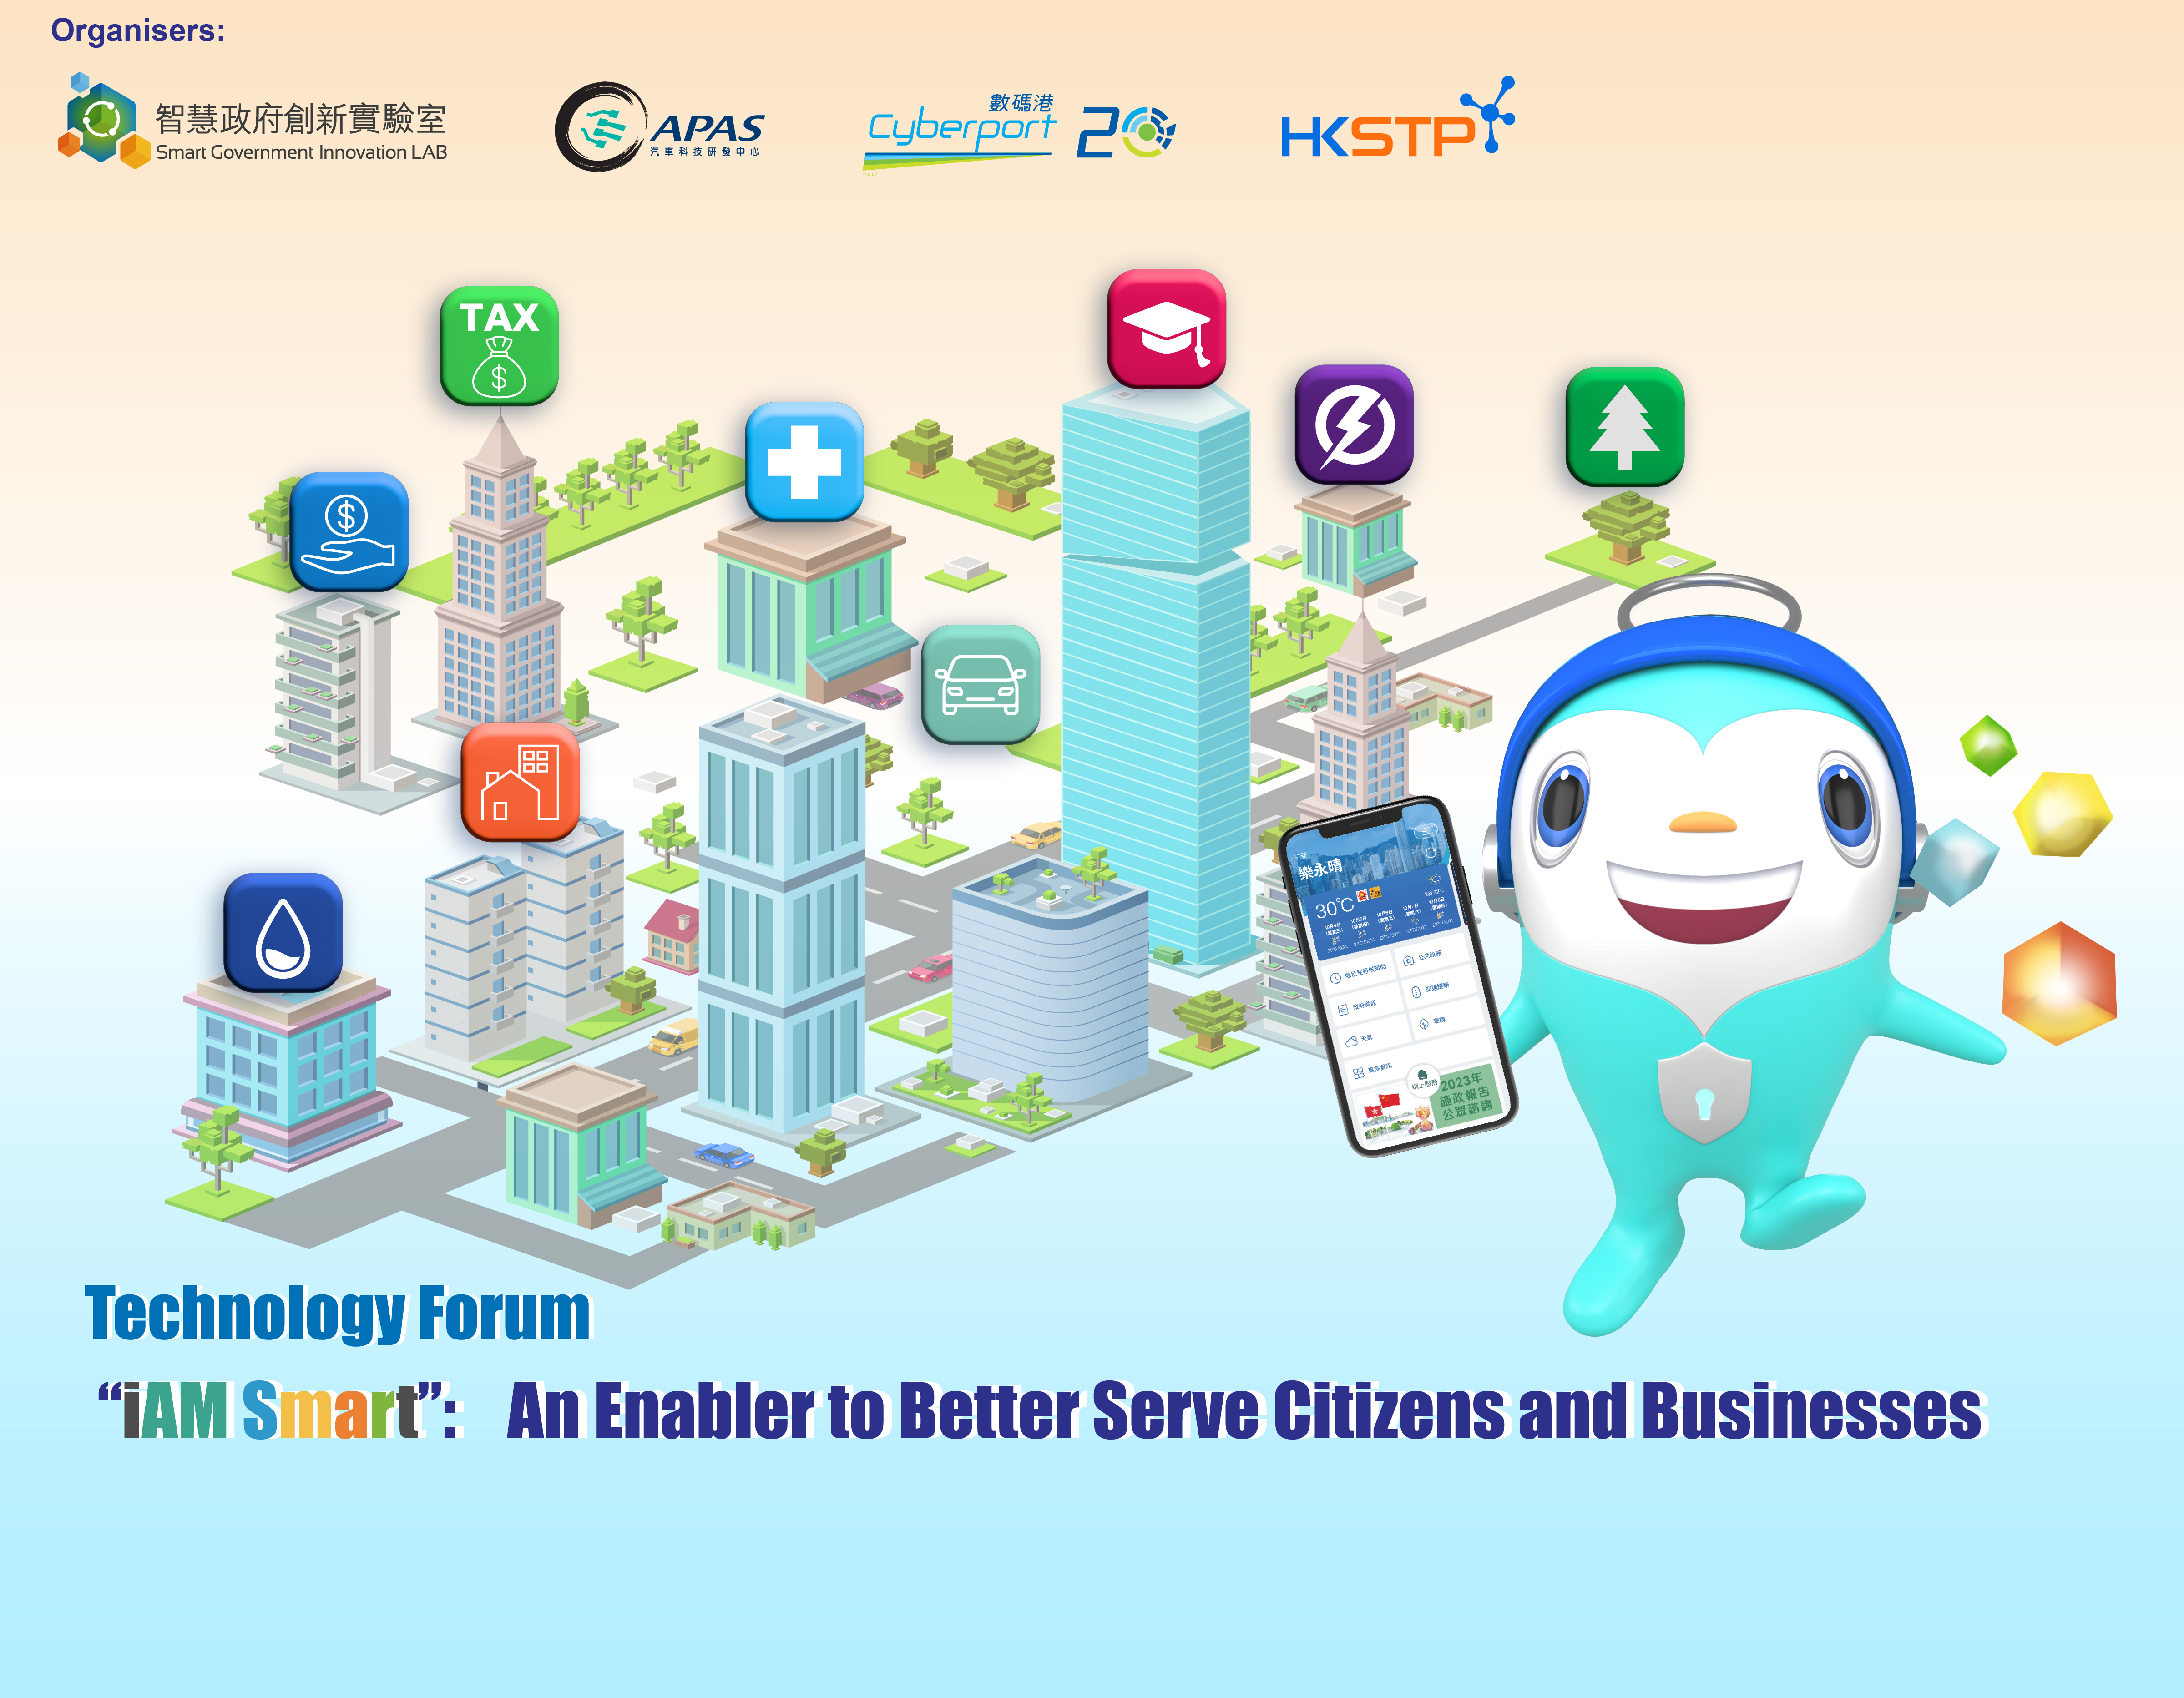 Technology Forum - “iAM Smart”: An Enabler to Better Serve Citizens and Businesses